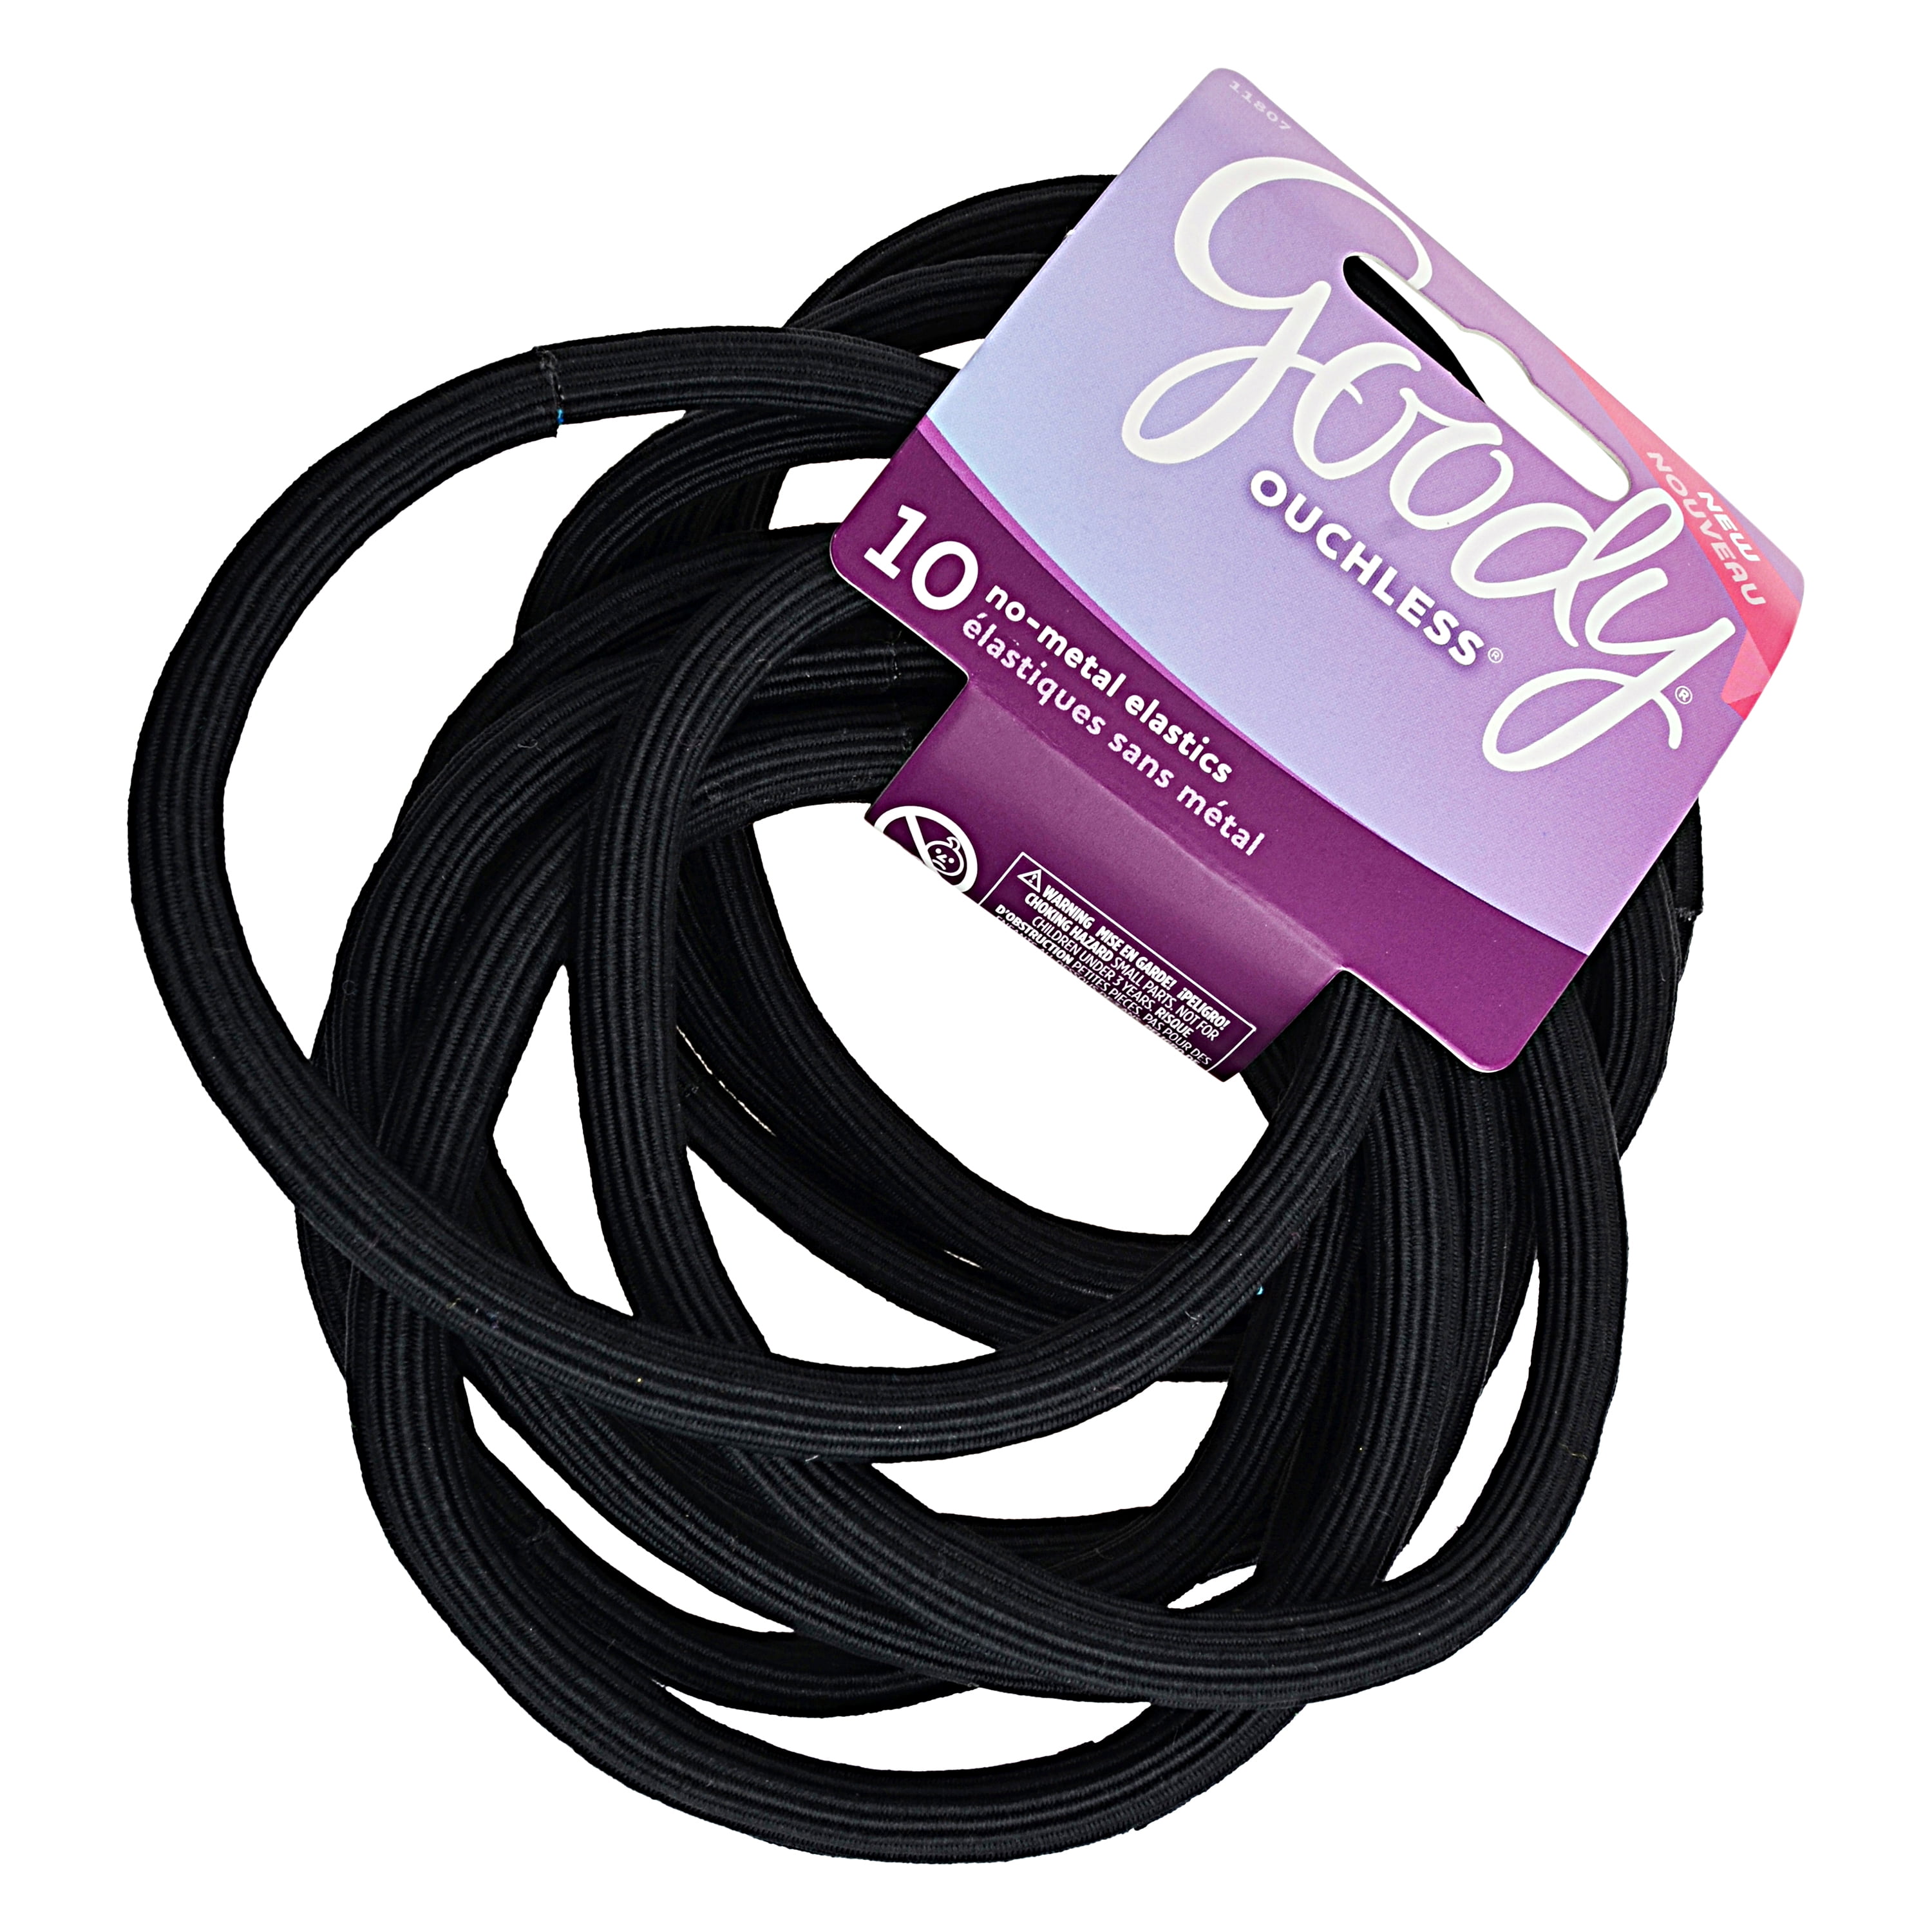 GOODY OUCHLESS No Metal Hair Ties Elastics Pony Tail 21 Count Black